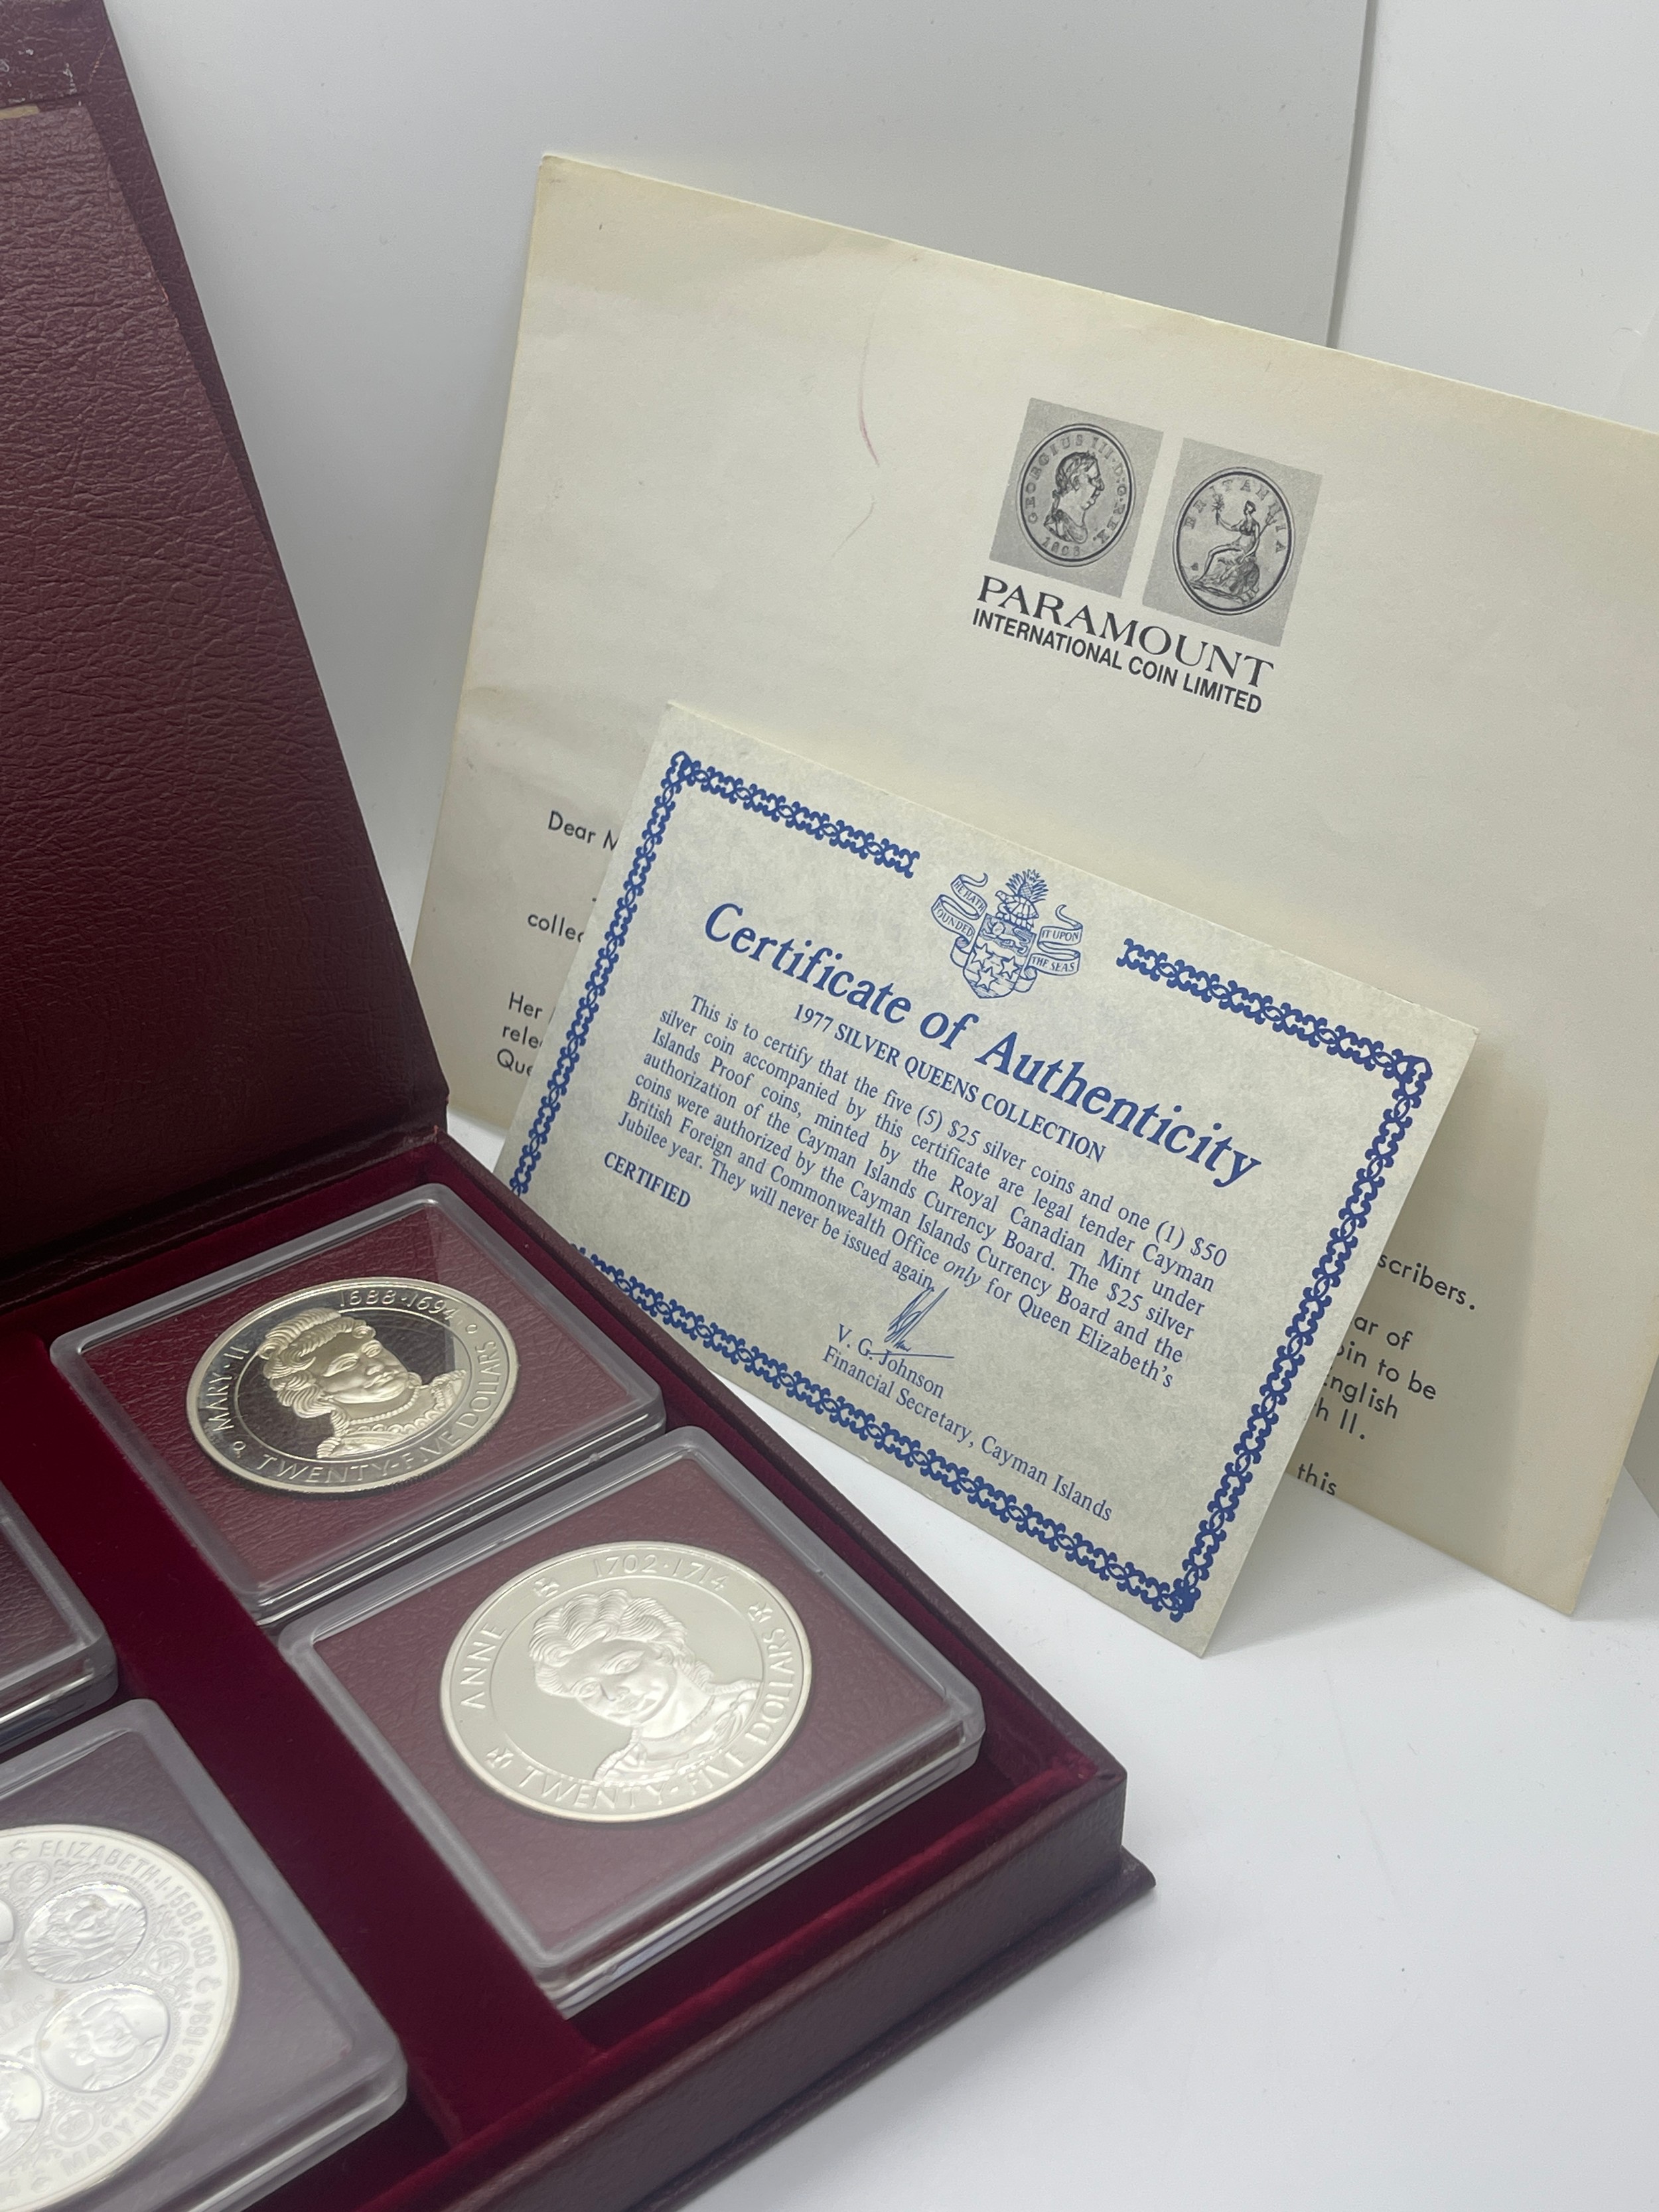 Boxed the Cayman island silver queens collection 1977 coin set with COA - Image 5 of 5